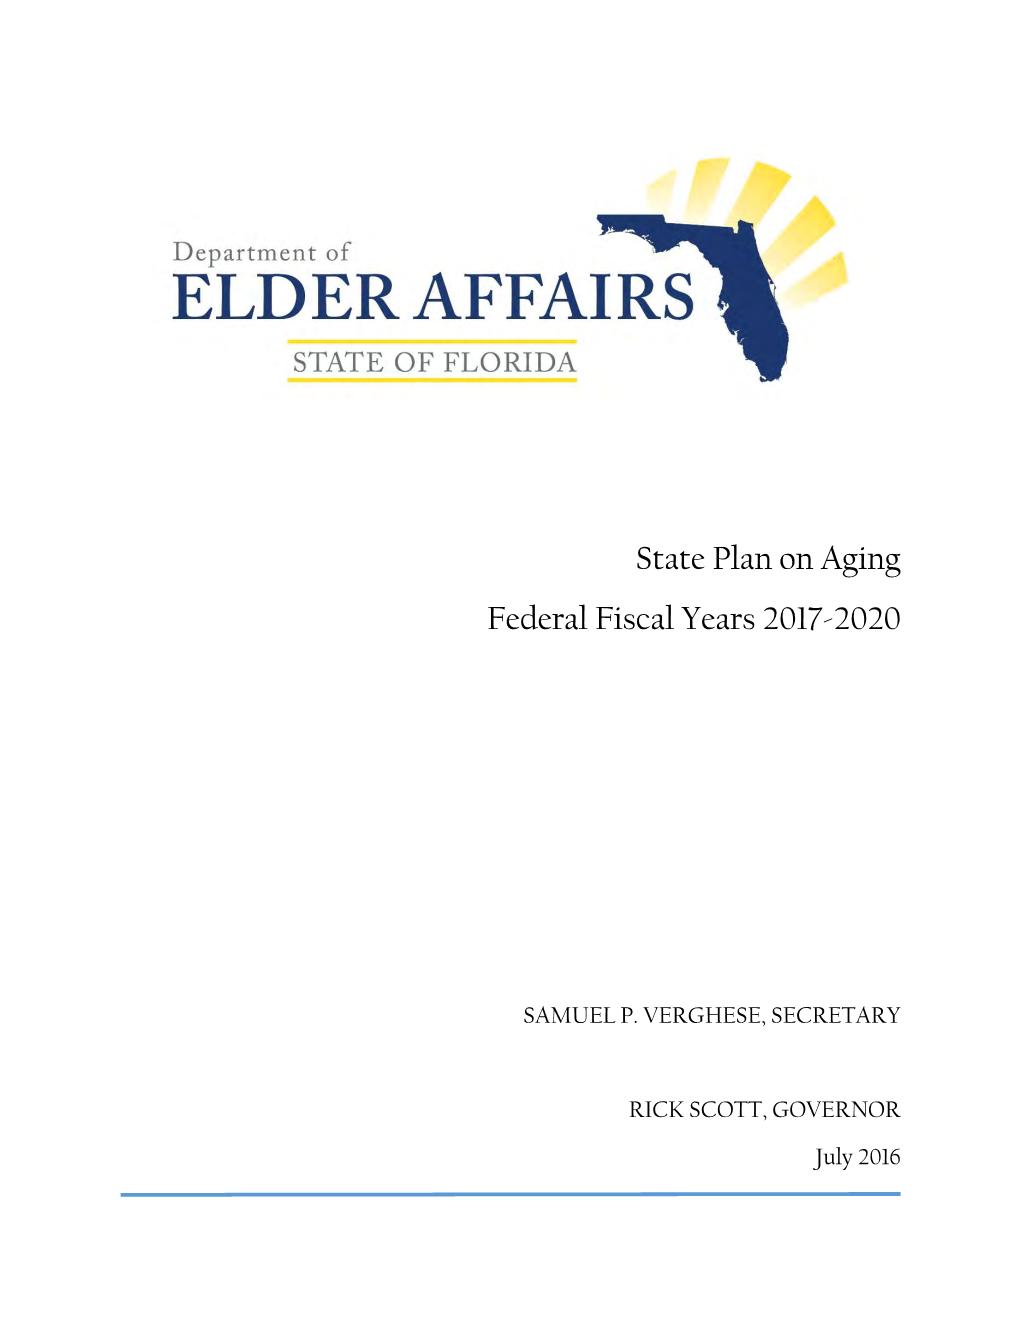 State Plan on Aging Federal Fiscal Years 2017-2020